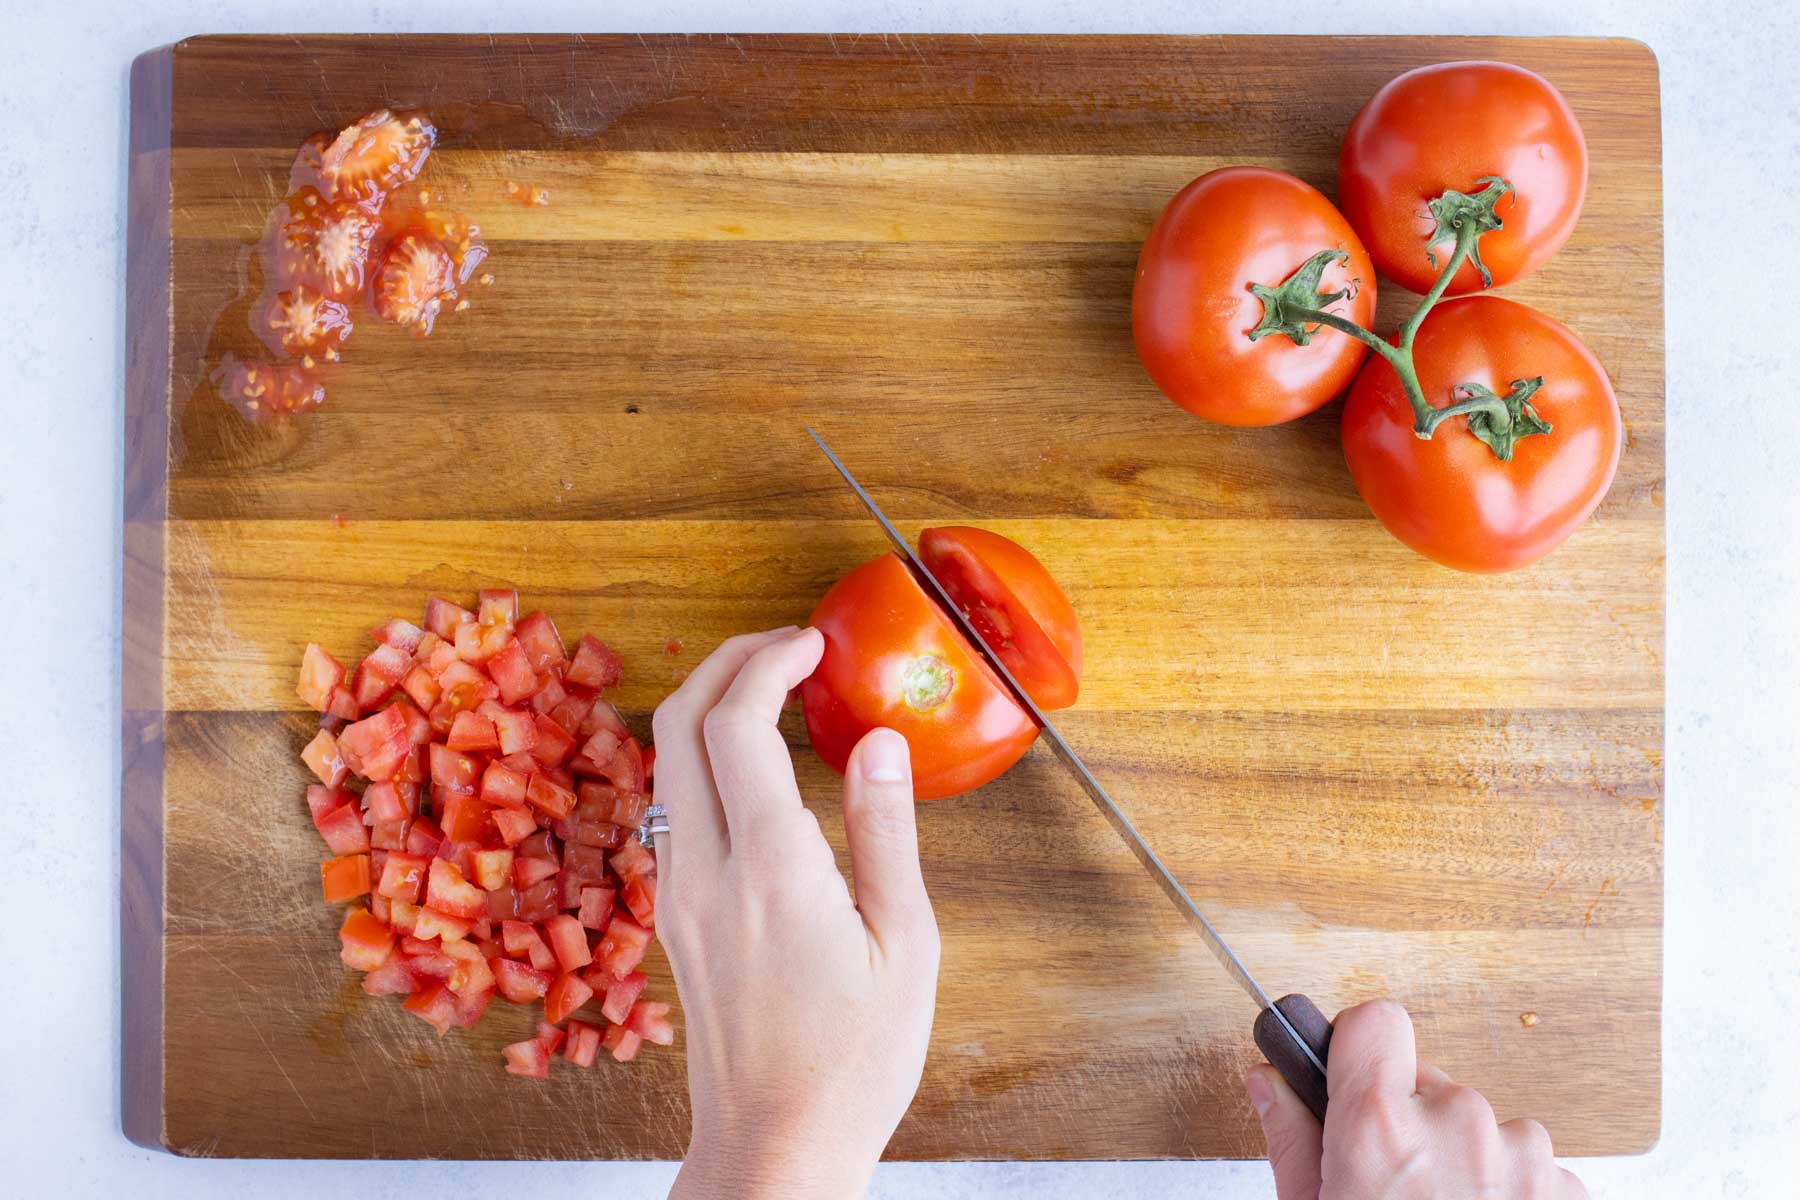 Tomatoes are chopped on a cutting board.